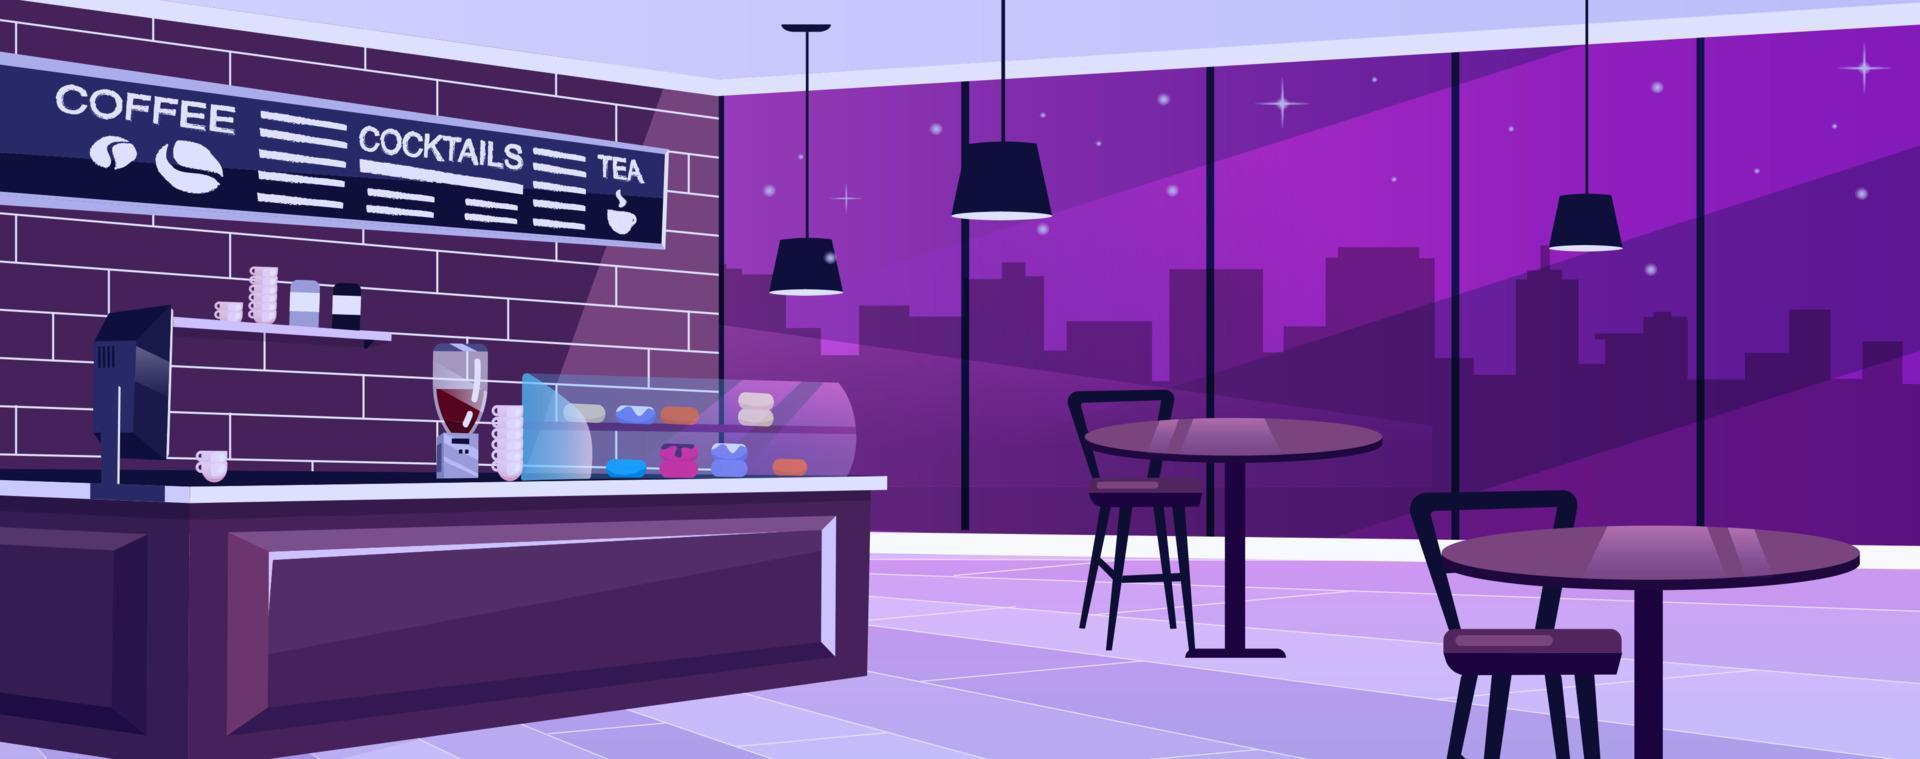 Coffee shop at night flat vector illustration. Spacious urban bar hall with vintage furniture. Panoramic windows facing evening skyline. Cartoon cafeteria interior with professional equipment